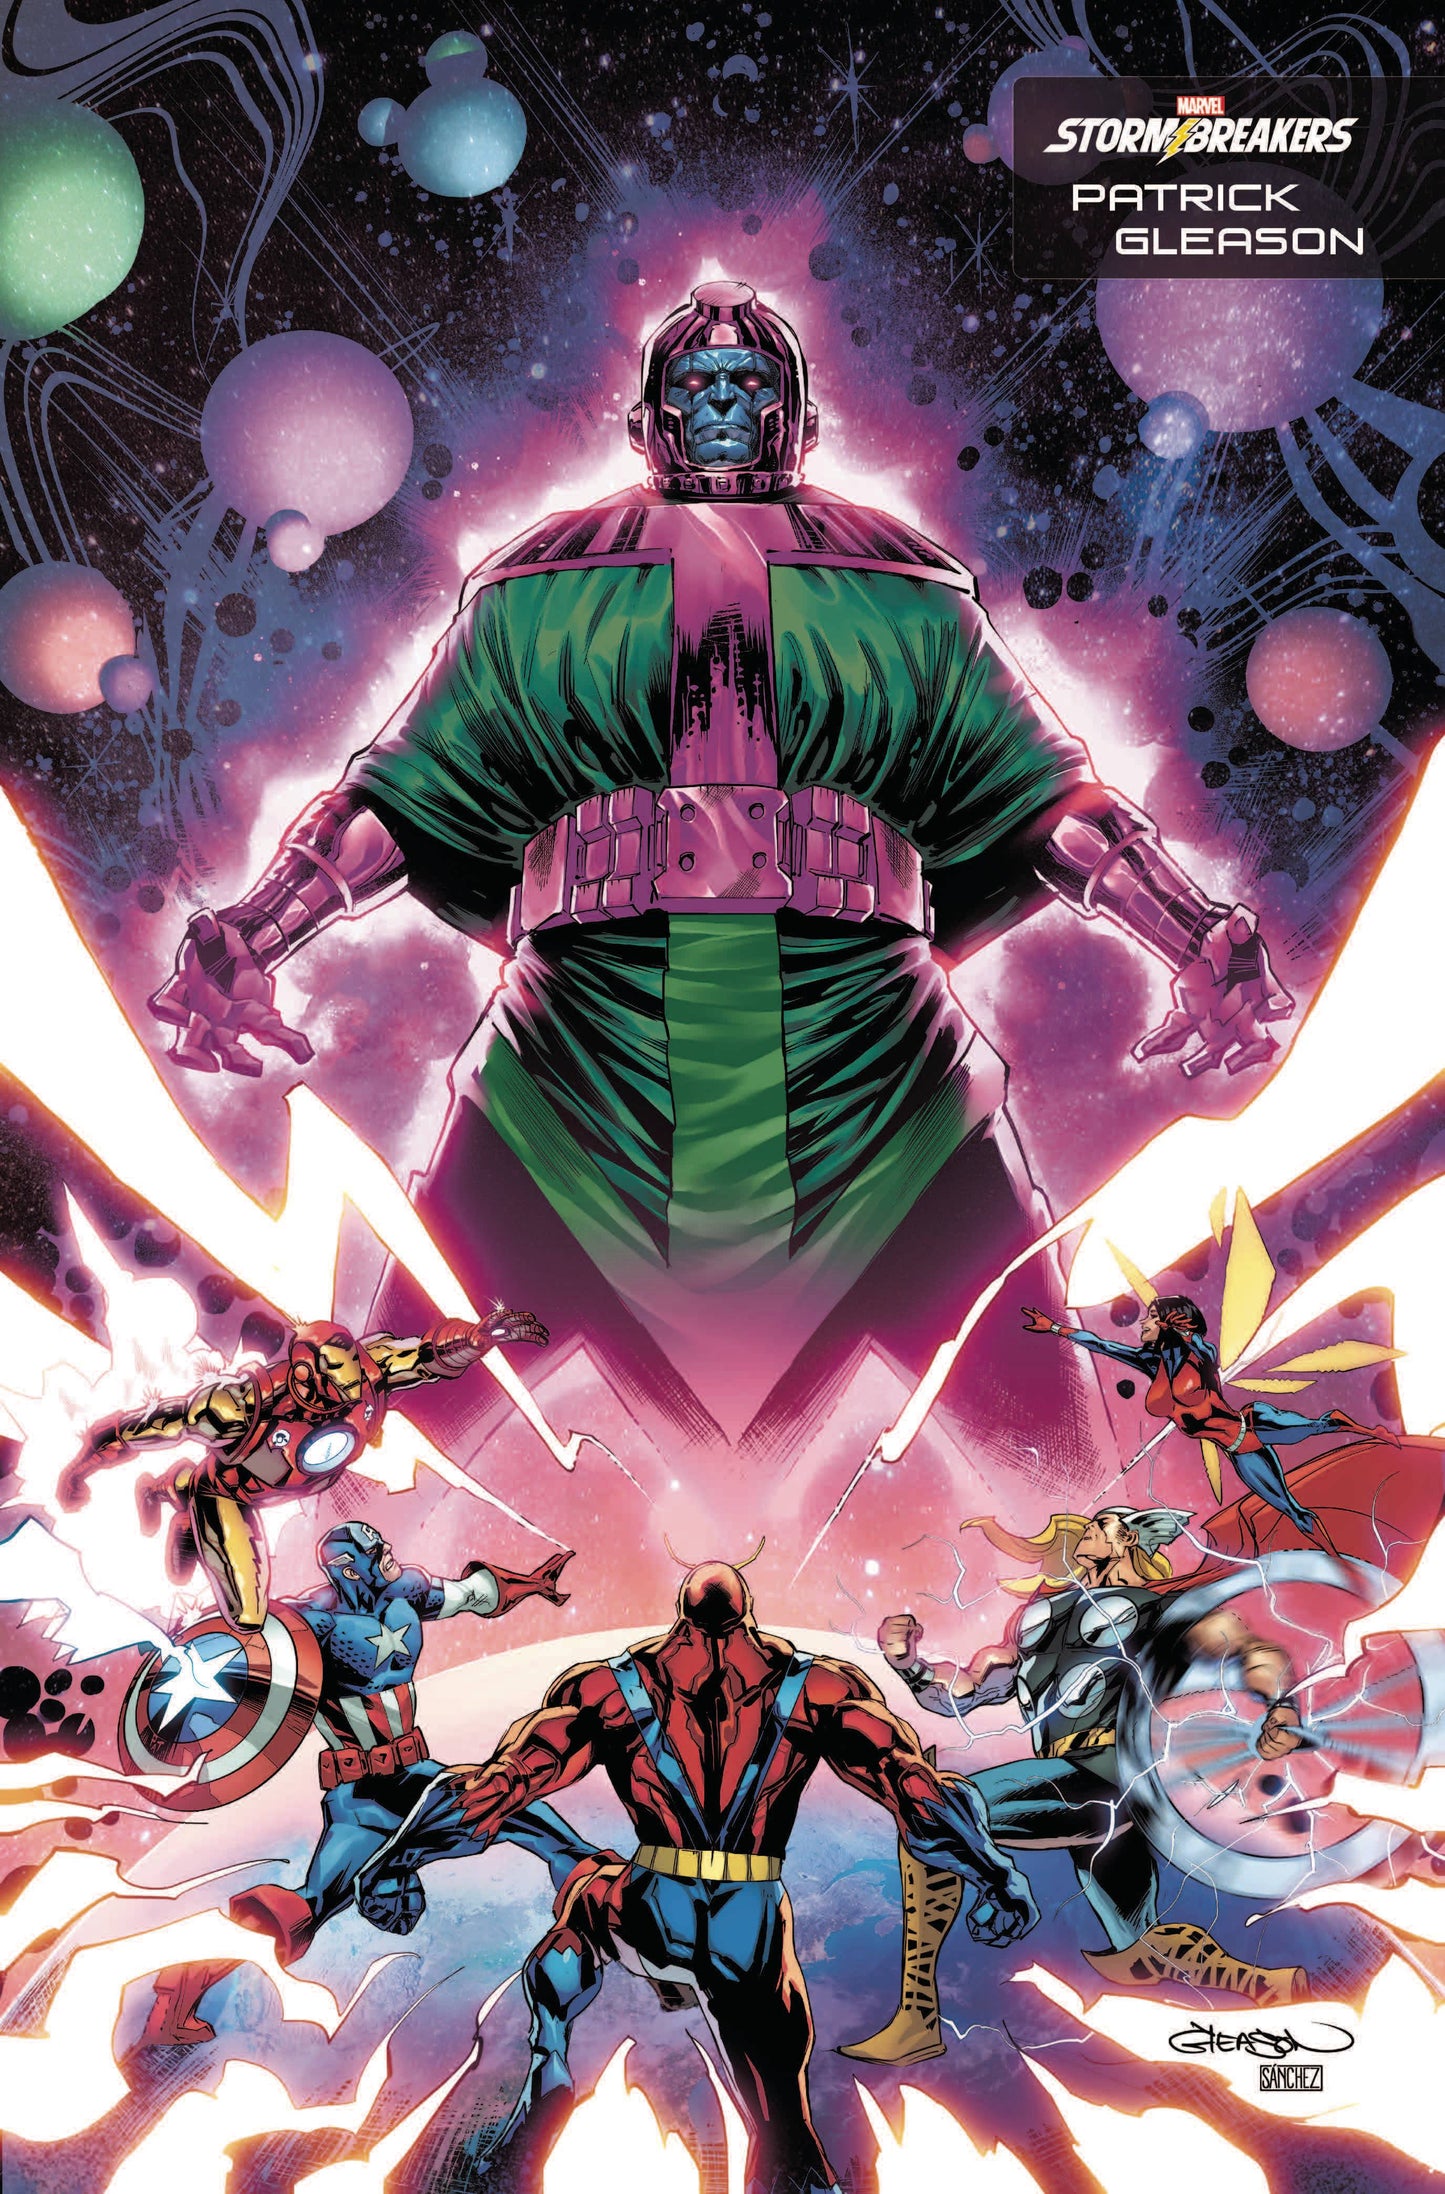 KANG THE CONQUEROR #1 (OF 5) GLEASON STORMBREAKERS VARIANT